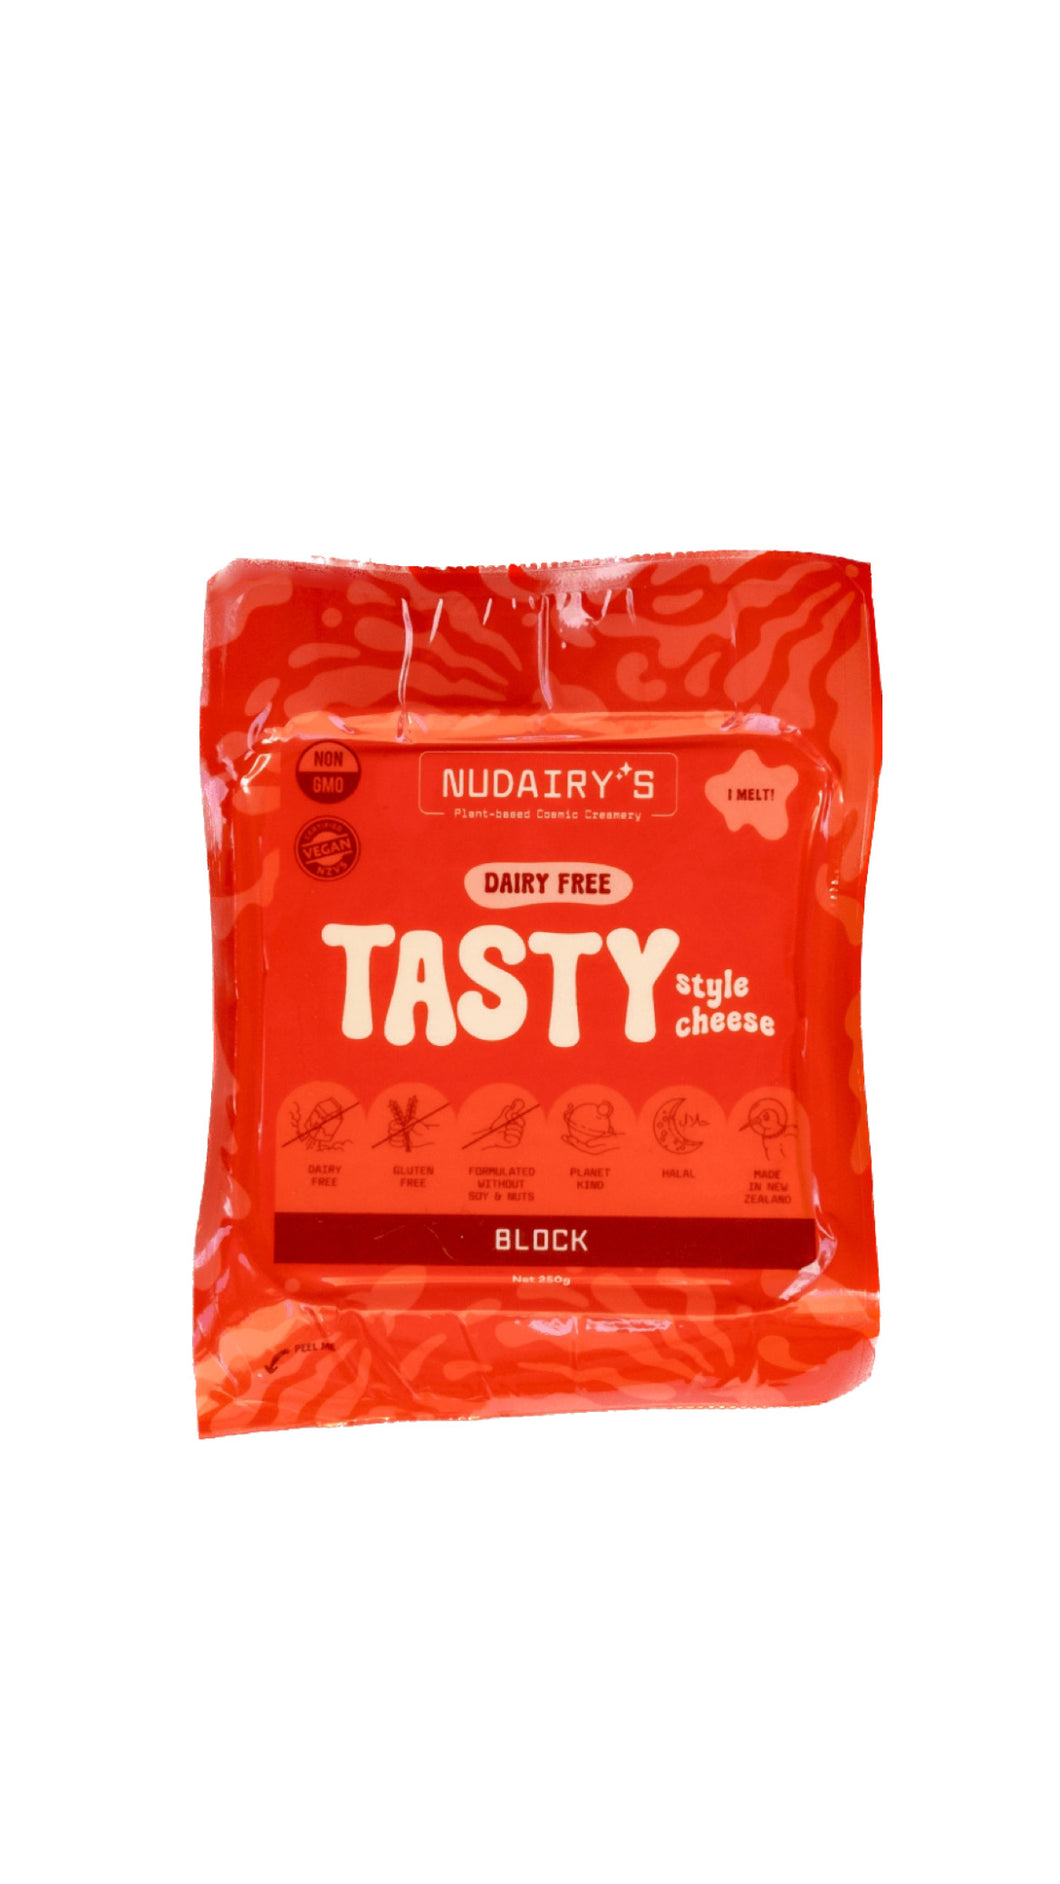 ** 15% OFF INTRODUCTORY OFFER ** Nudairy - Tasty Block 200g (COLD)